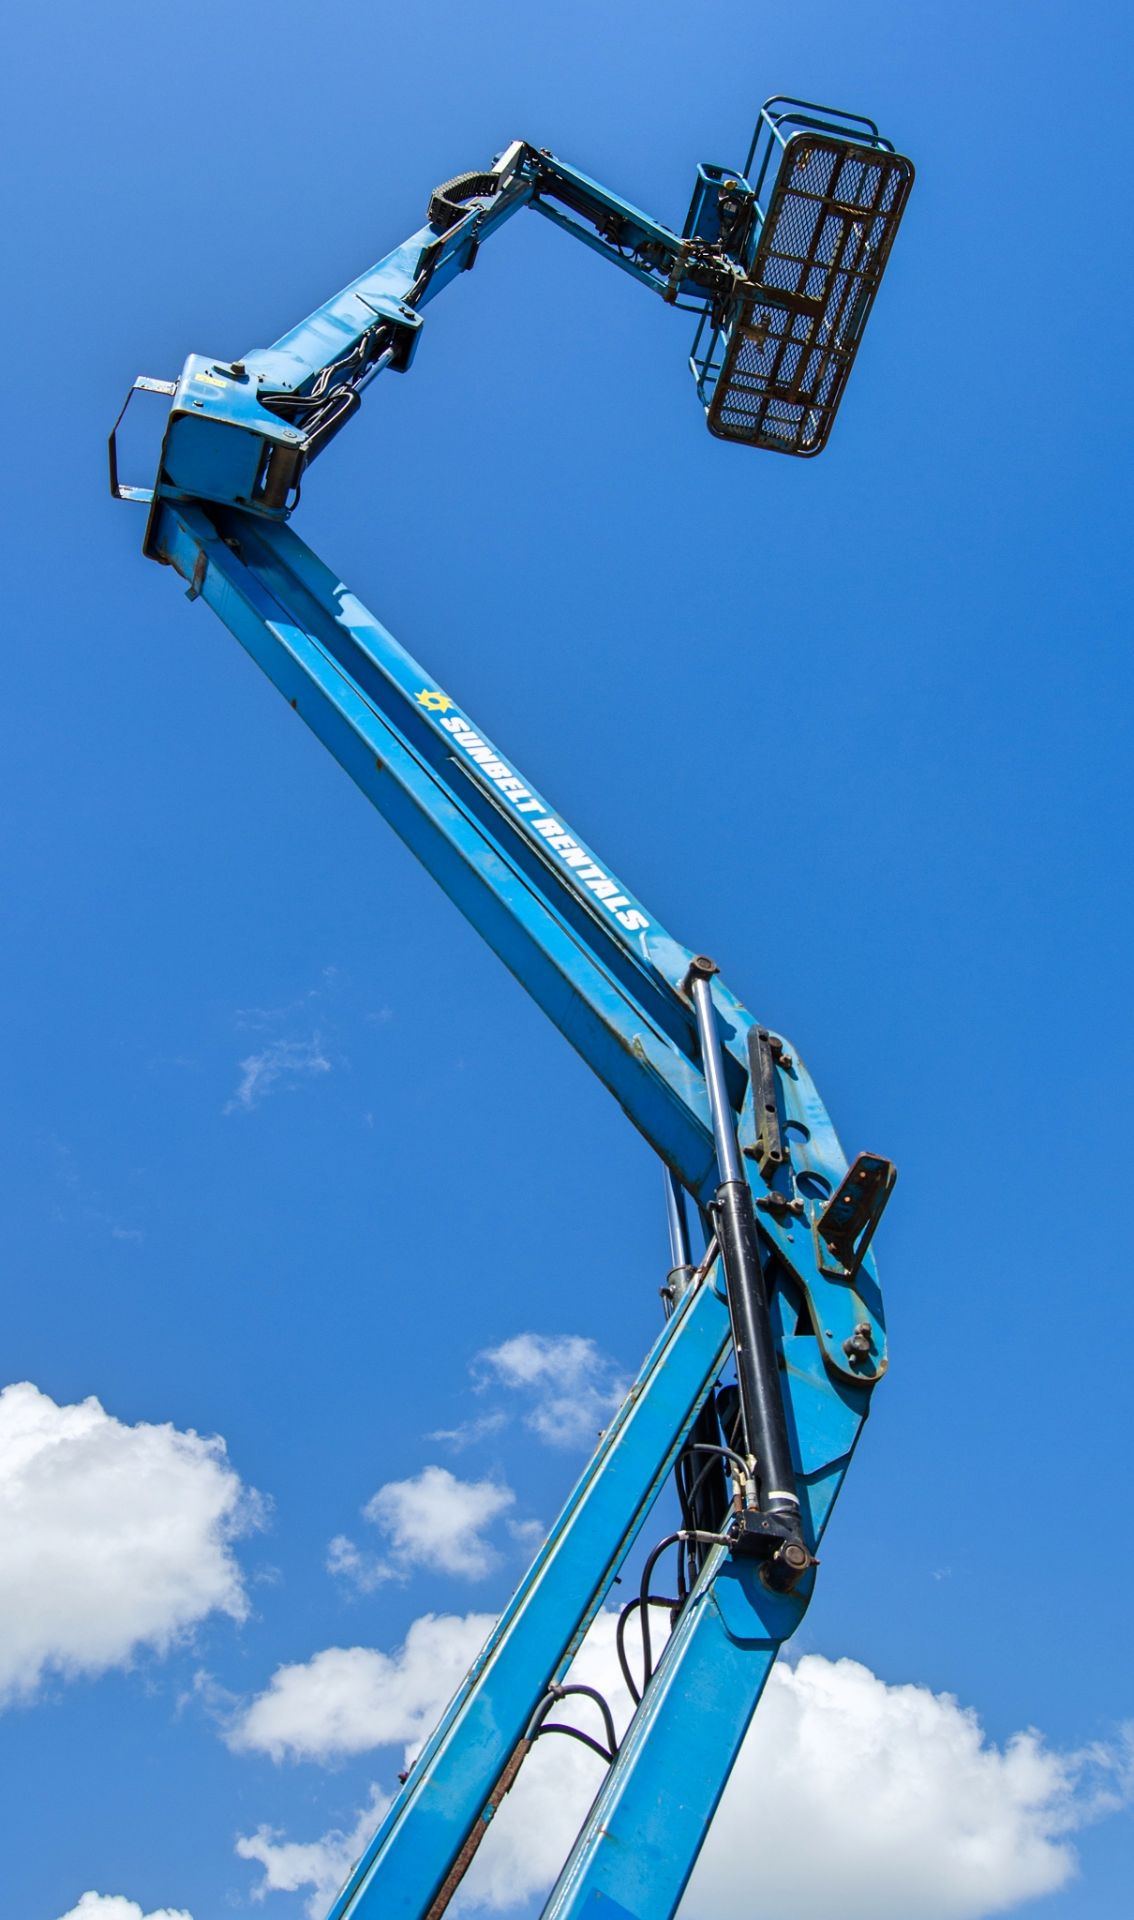 Genie Z-45/25 battery electric/diesel 4WD articulated boom lift Year: 2011 S/N: Z452512B-2013 - Image 10 of 18